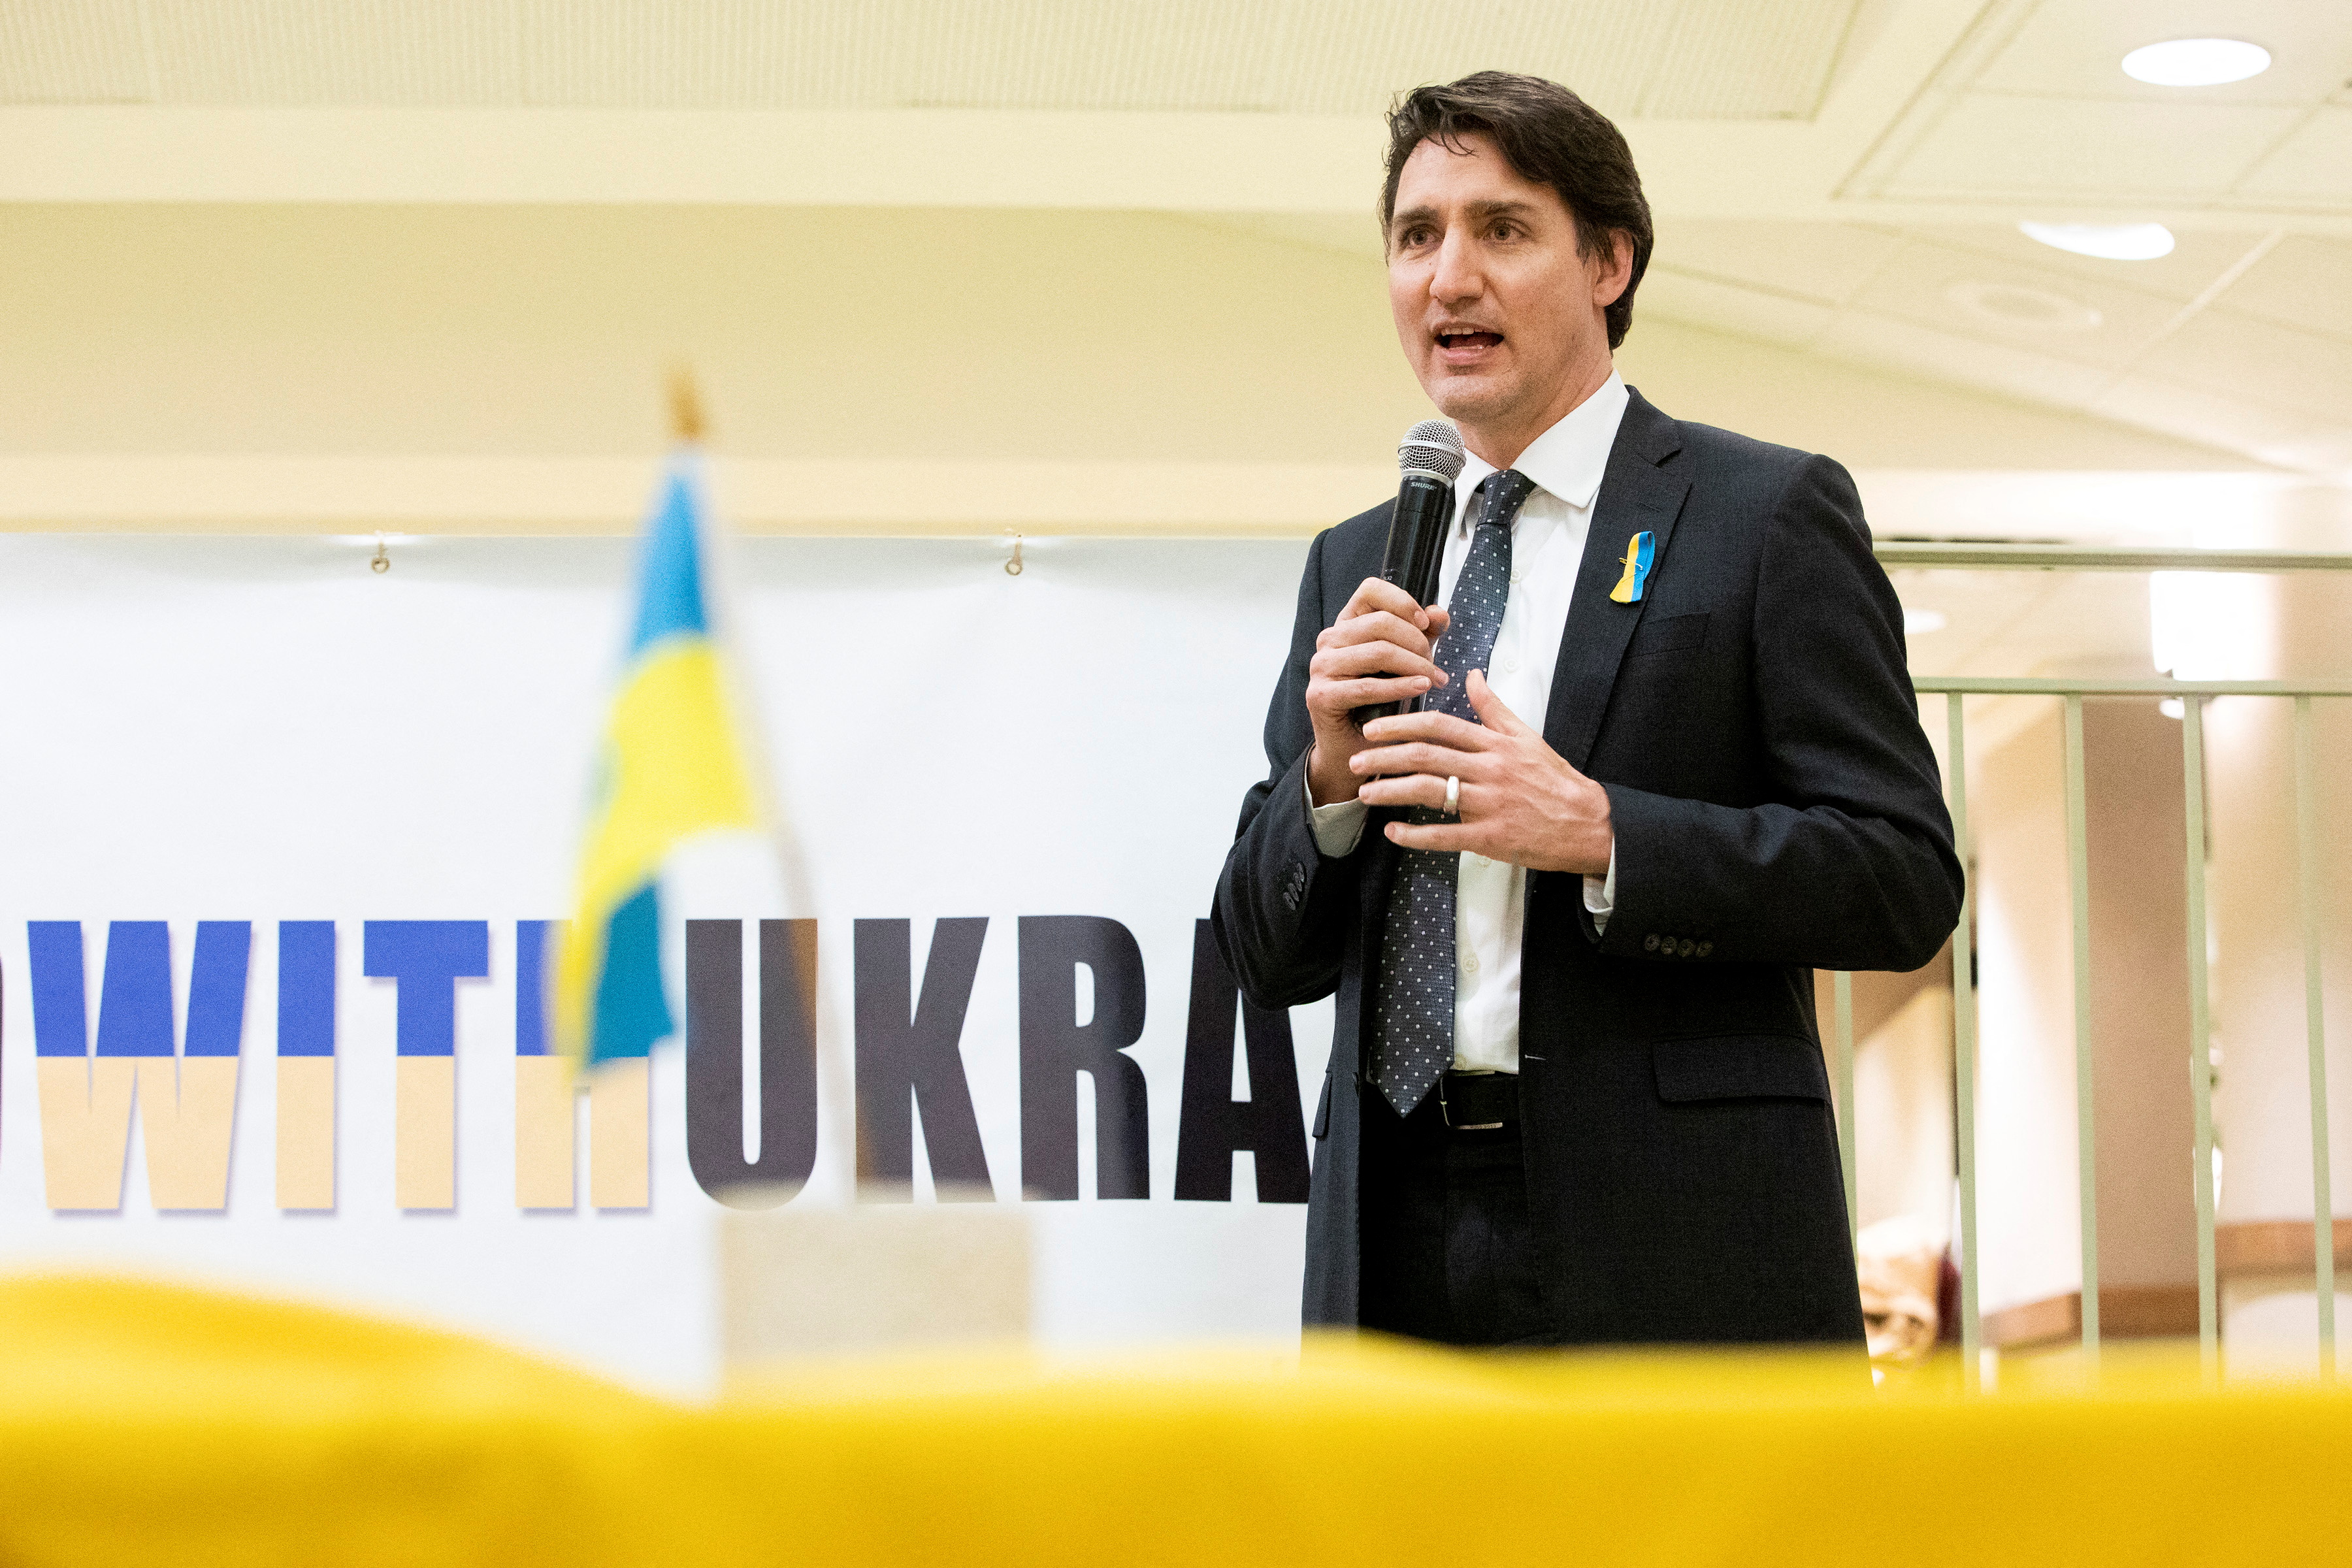 Canada's PM Trudeau visits church to speak with members of Ukrainian community